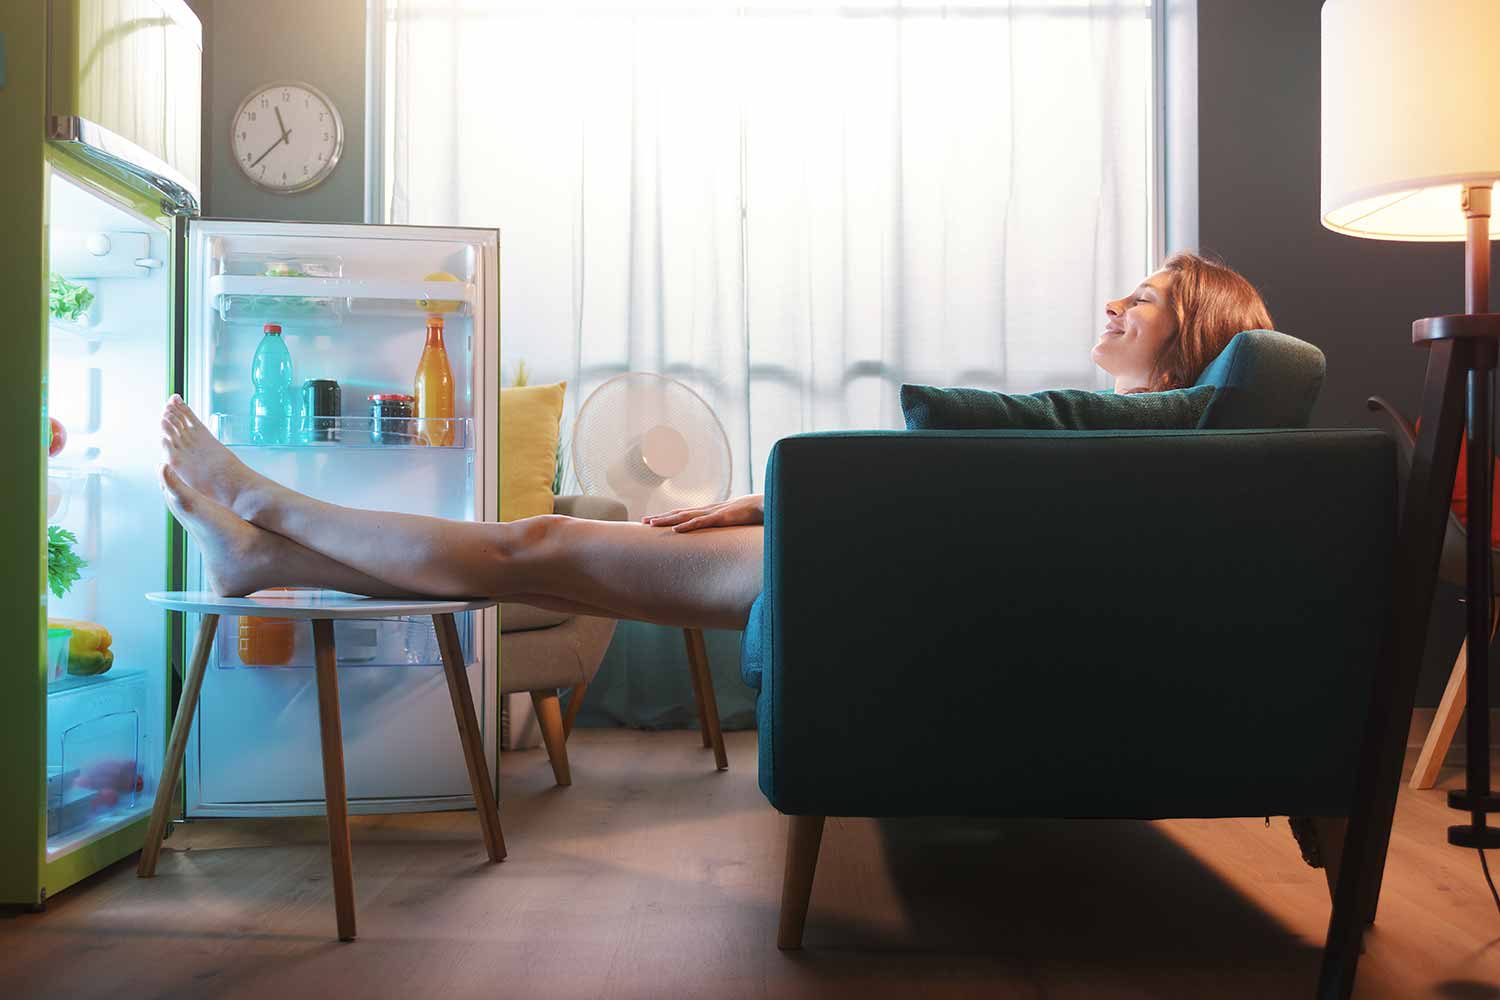 woman cooling her feet in a fridge